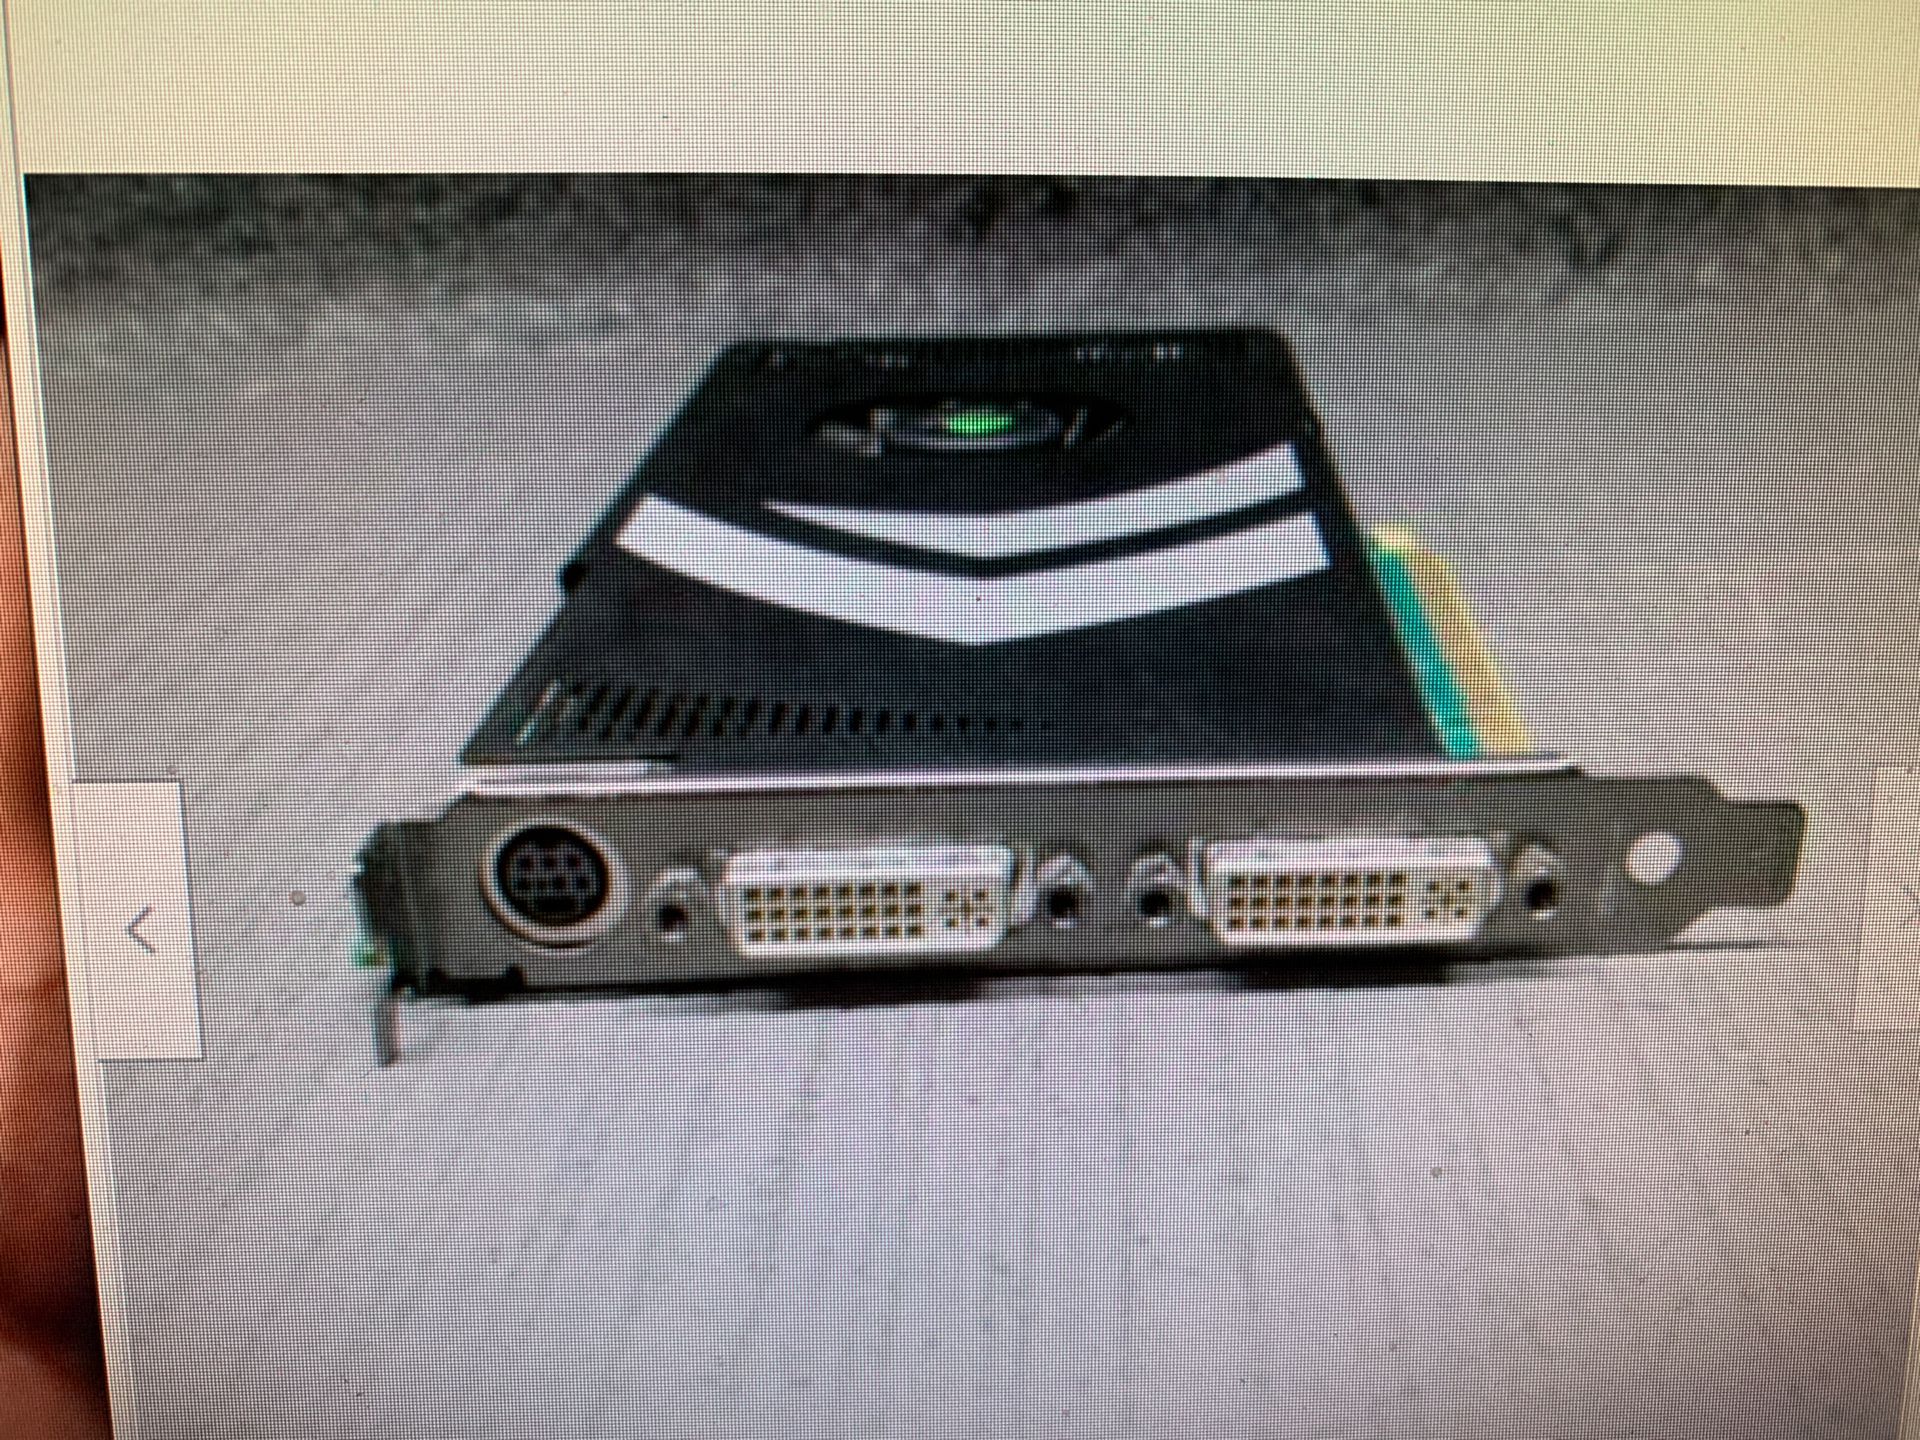 NVIDIA GEFORCE 8800GT Graphics card